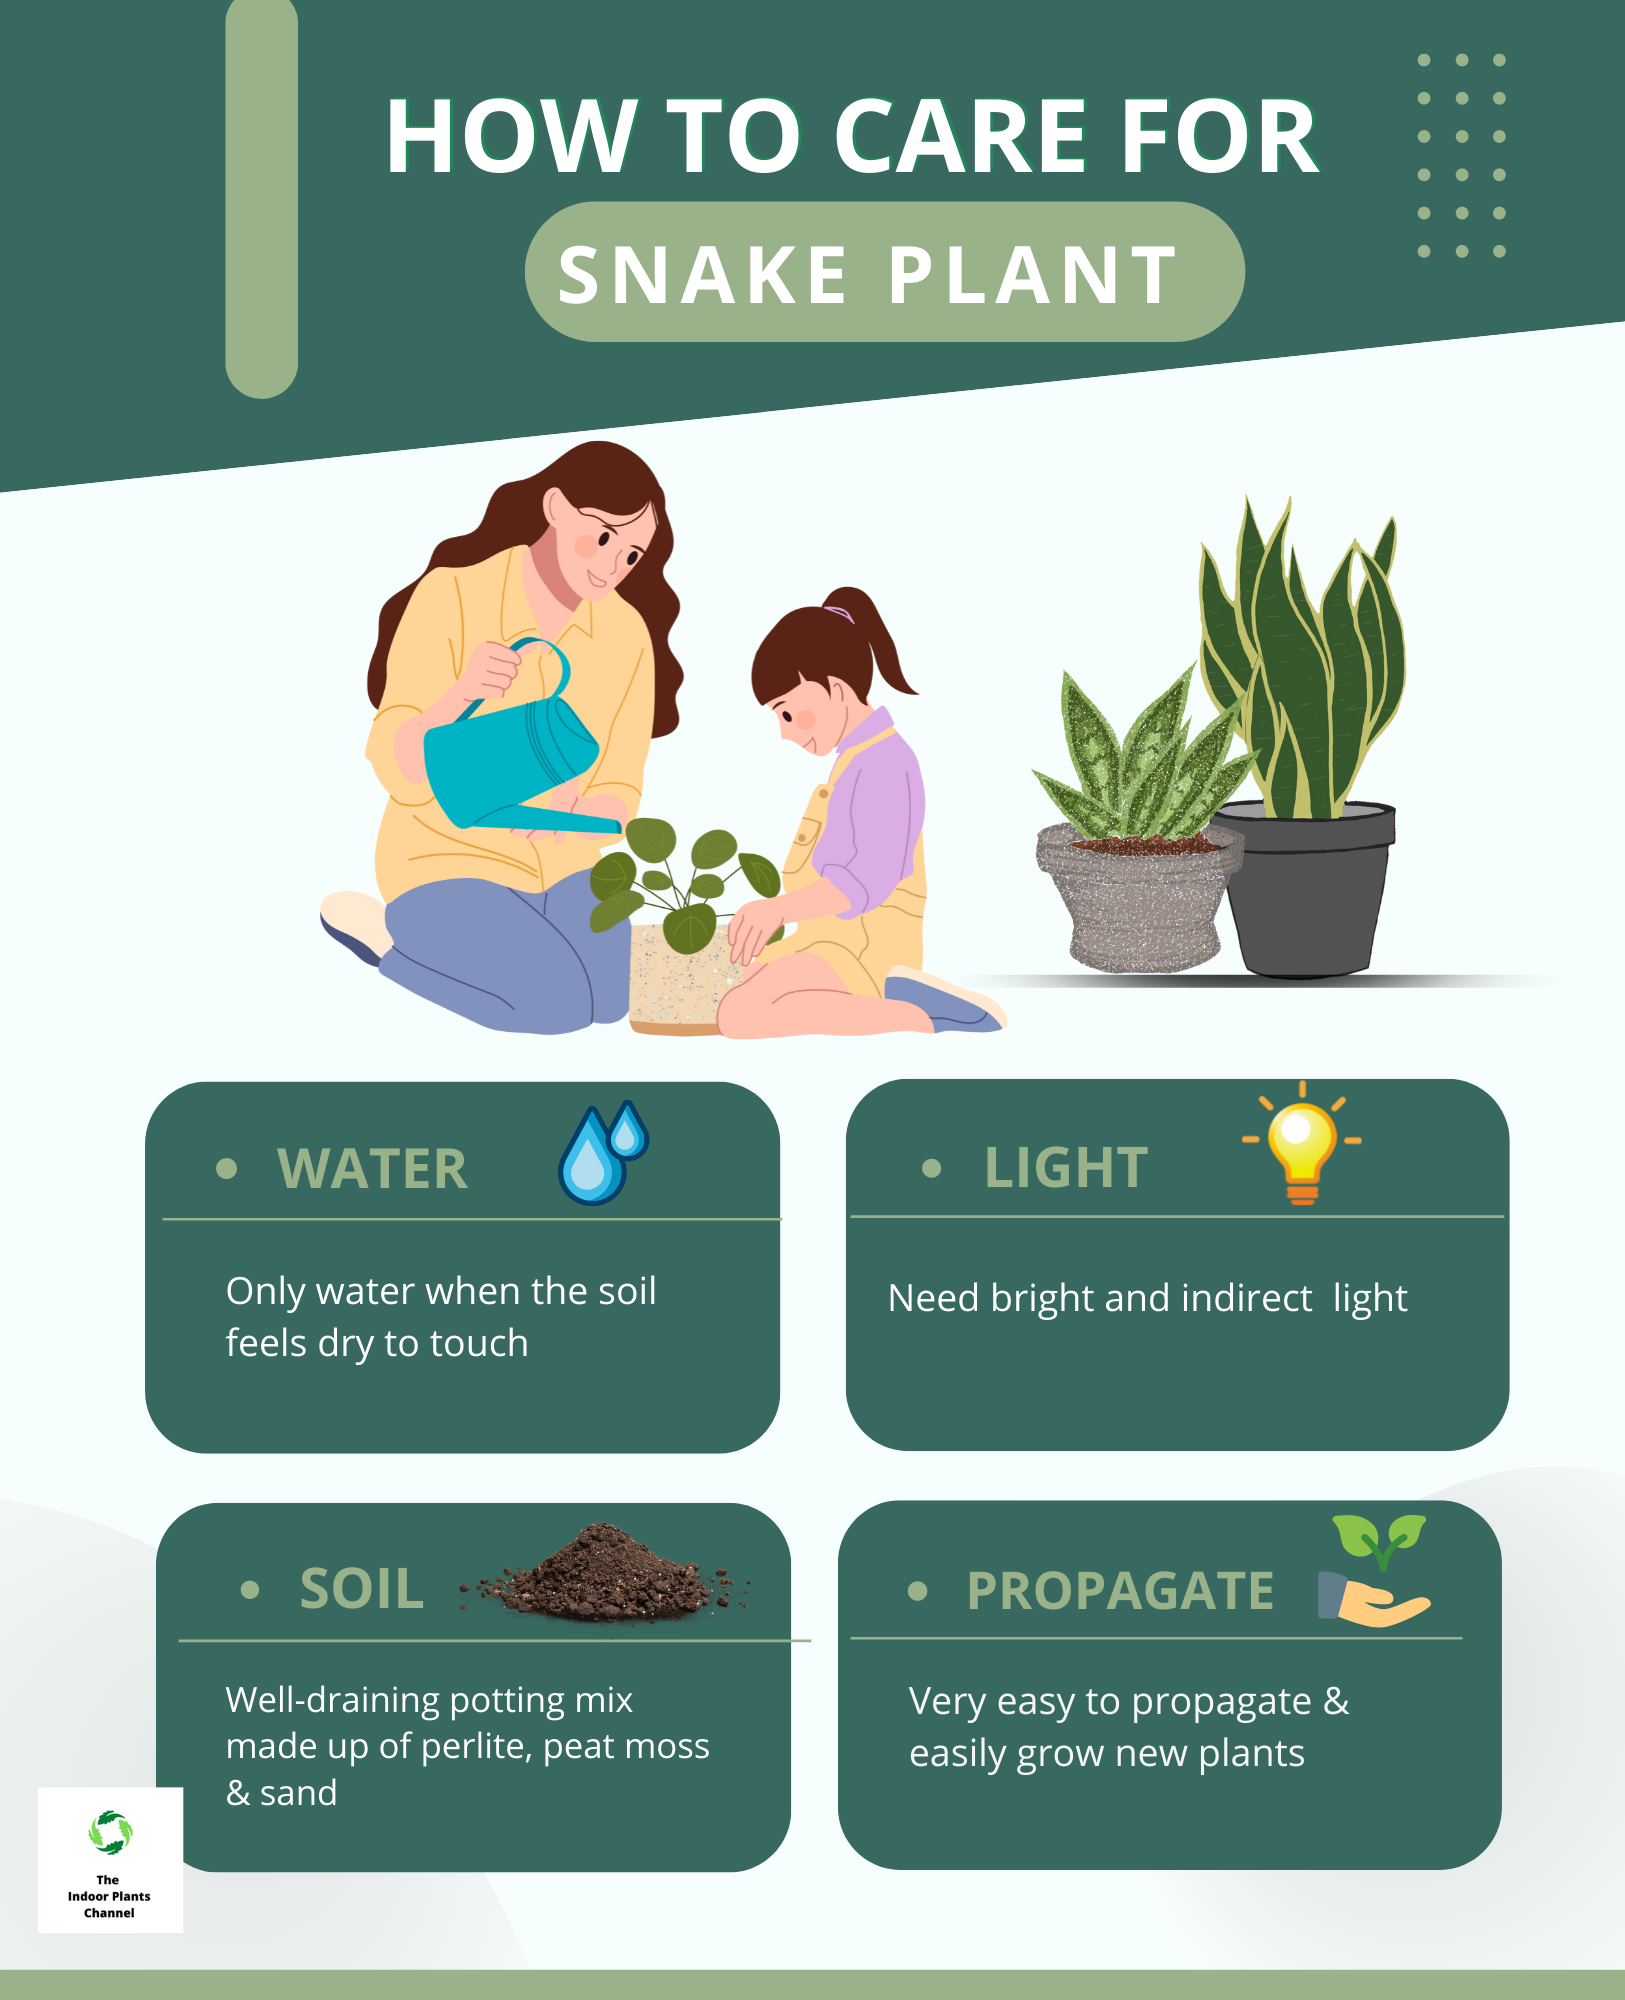 How To Care For A Snake Plant?